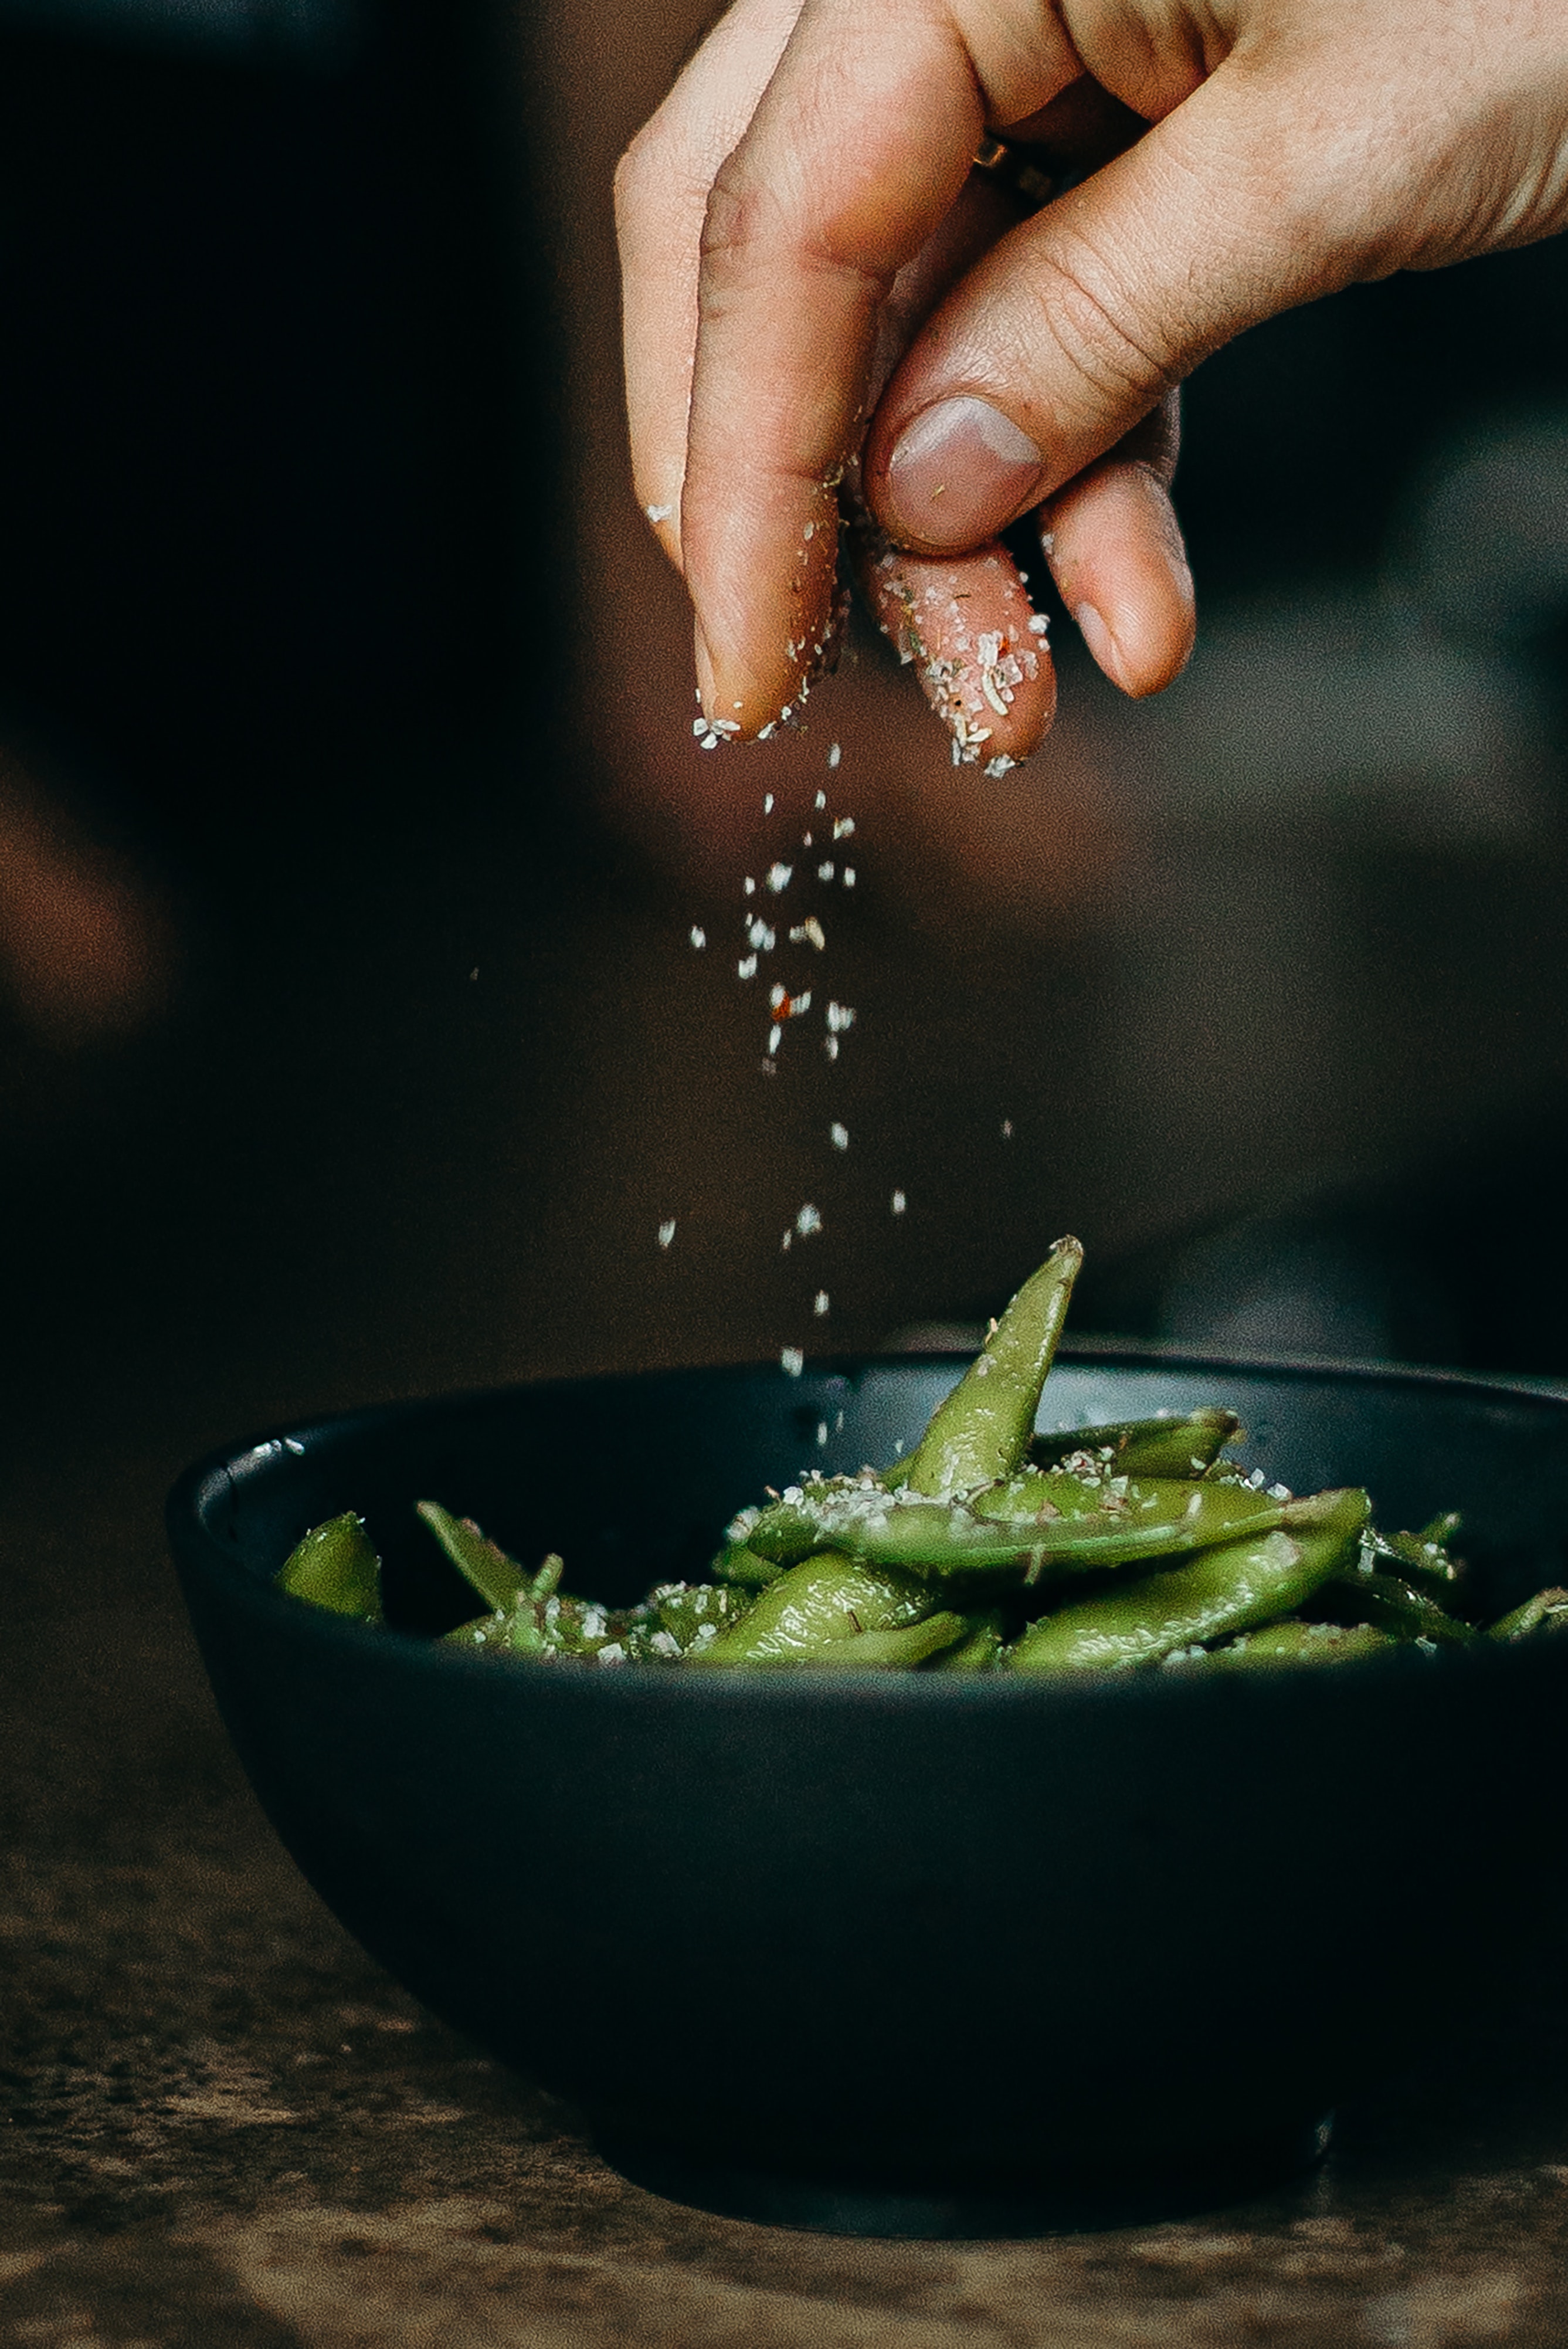 Lunchboys Berlin - Photo by cottonbro studio: https://www.pexels.com/photo/person-pouring-seasoning-on-green-beans-on-bowl-3338497/